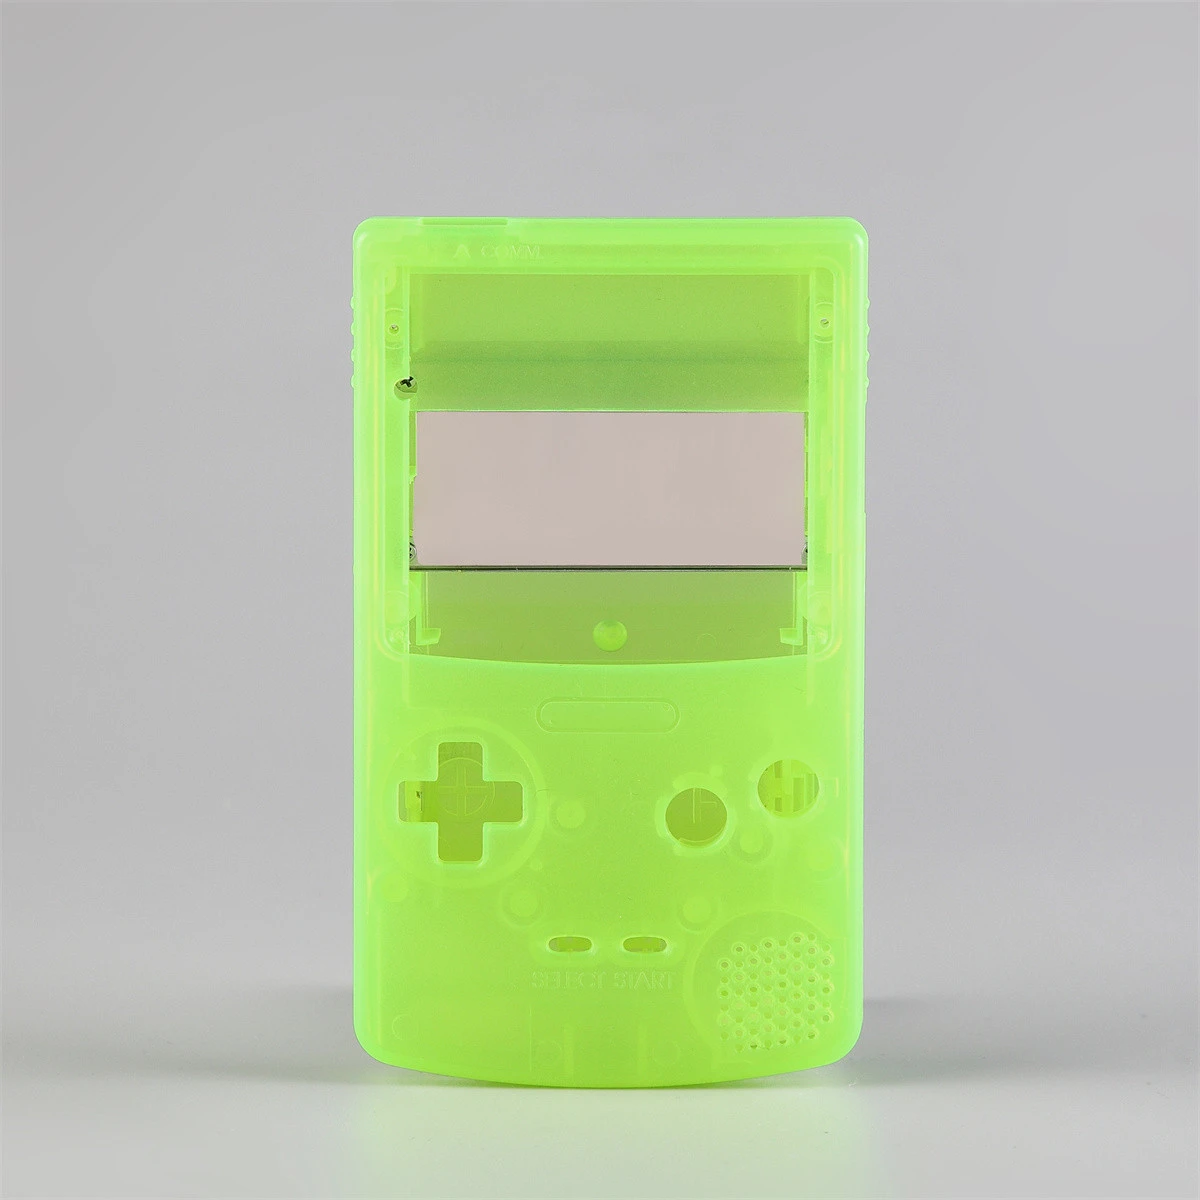 REPLACEMENT SHELL FOR GBC RETRO PIXEL 2.0 LAMINATED COUSTOM Housing FOR GAMEBOY ADVANCE COLOR